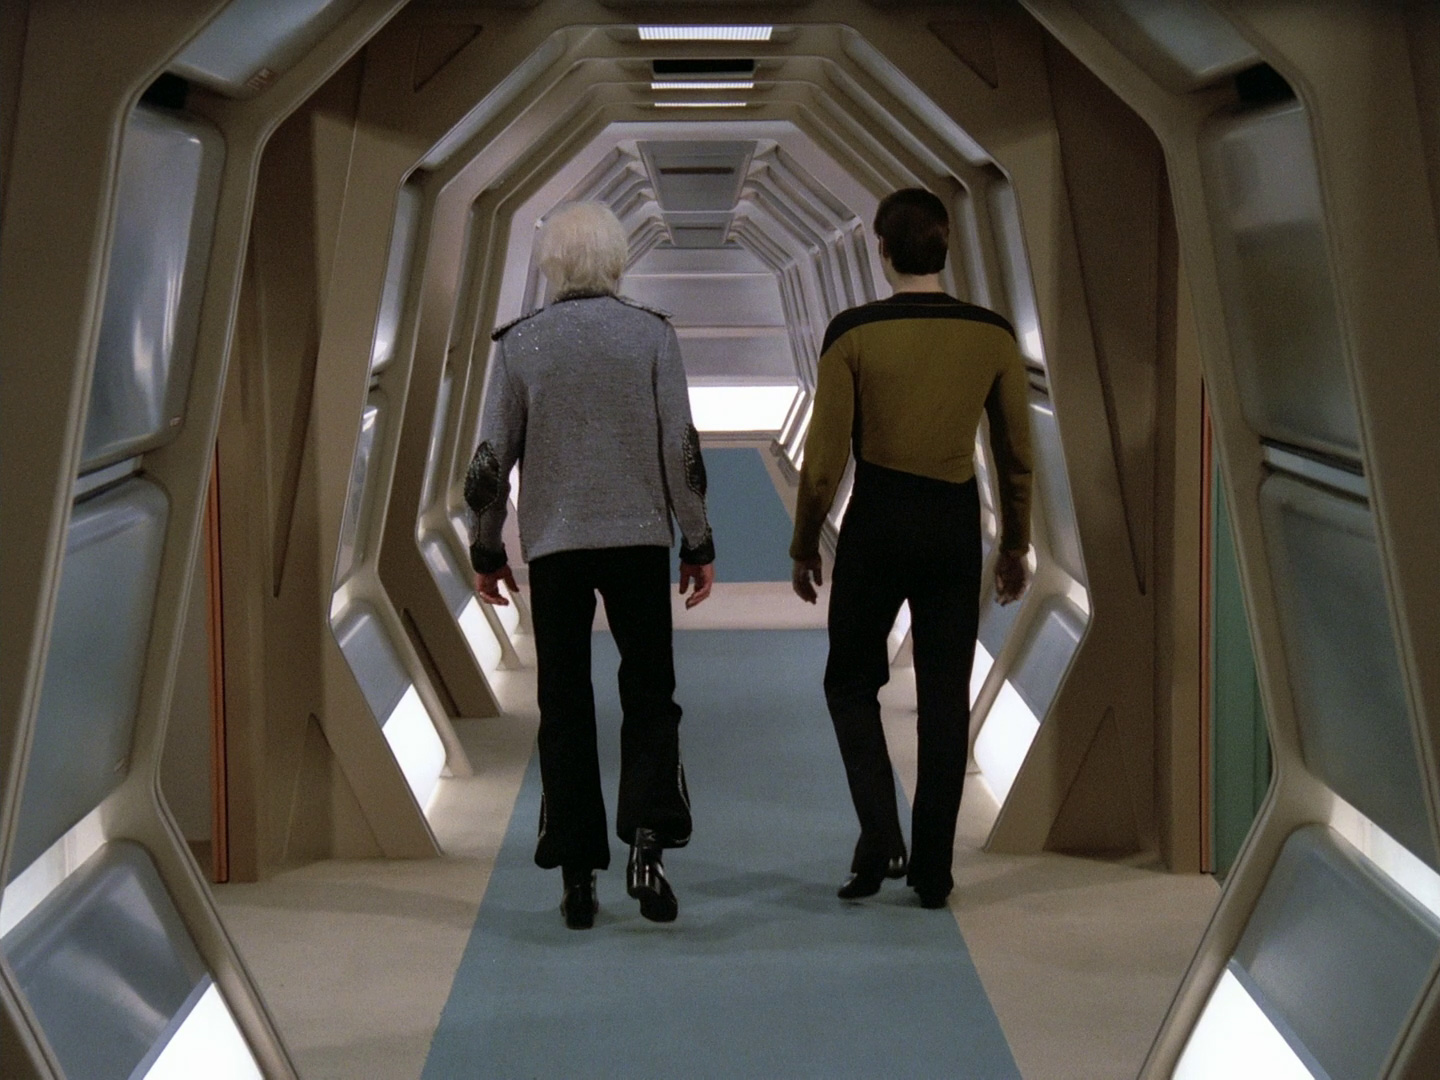 Corridor from Encounter at Farpoint, looking broadly identical